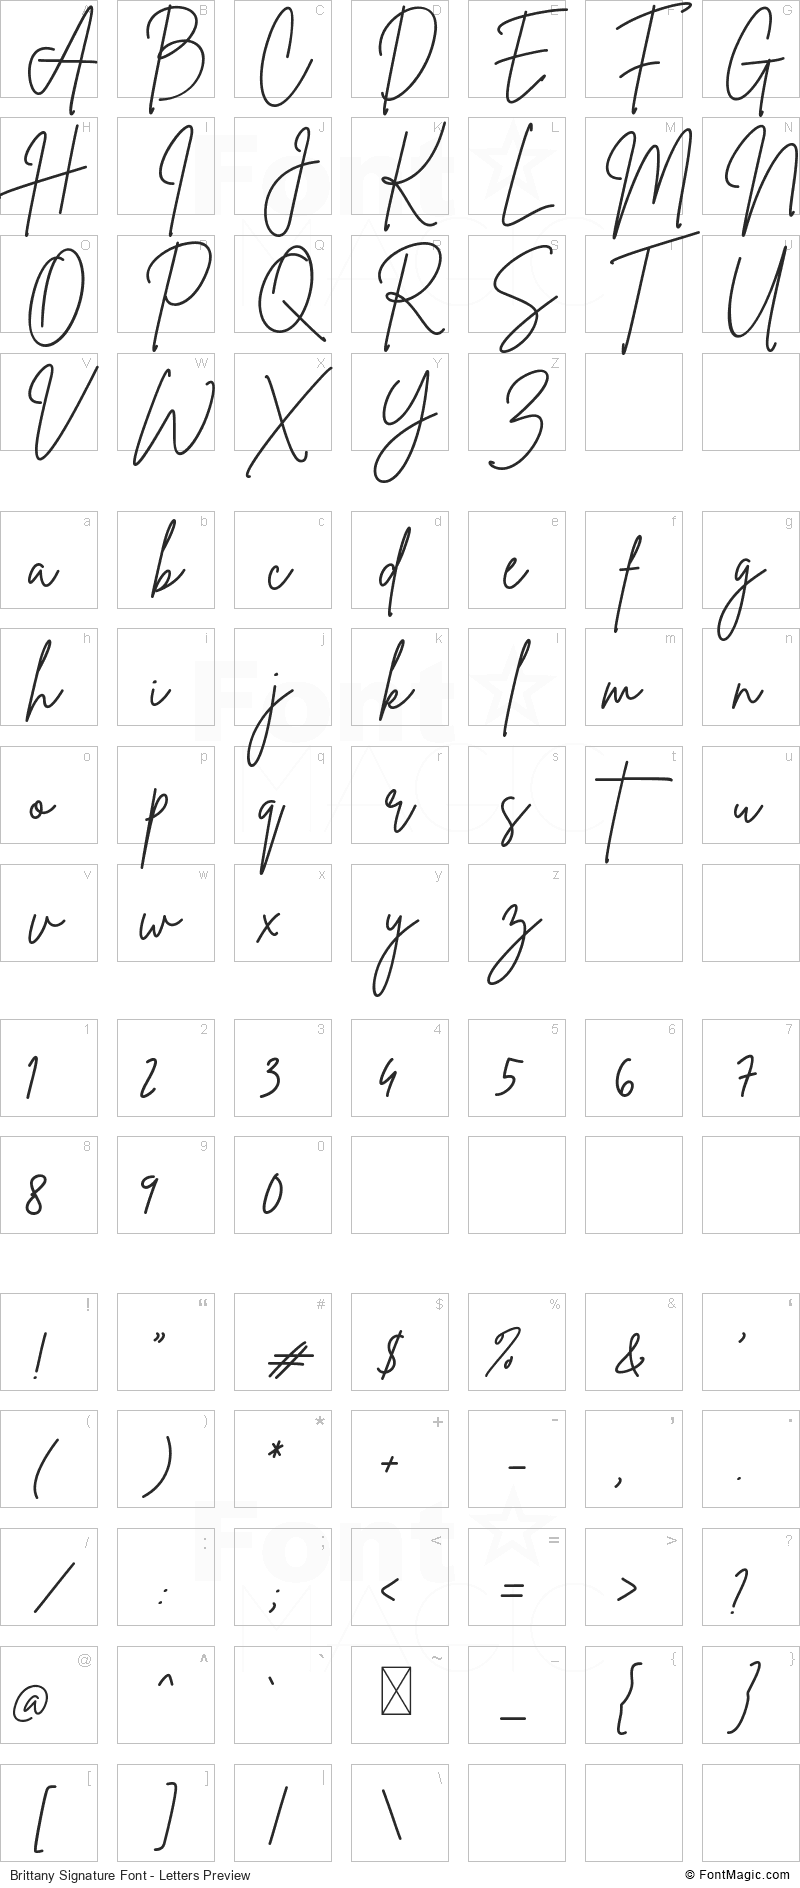 Brittany Signature Font - All Latters Preview Chart